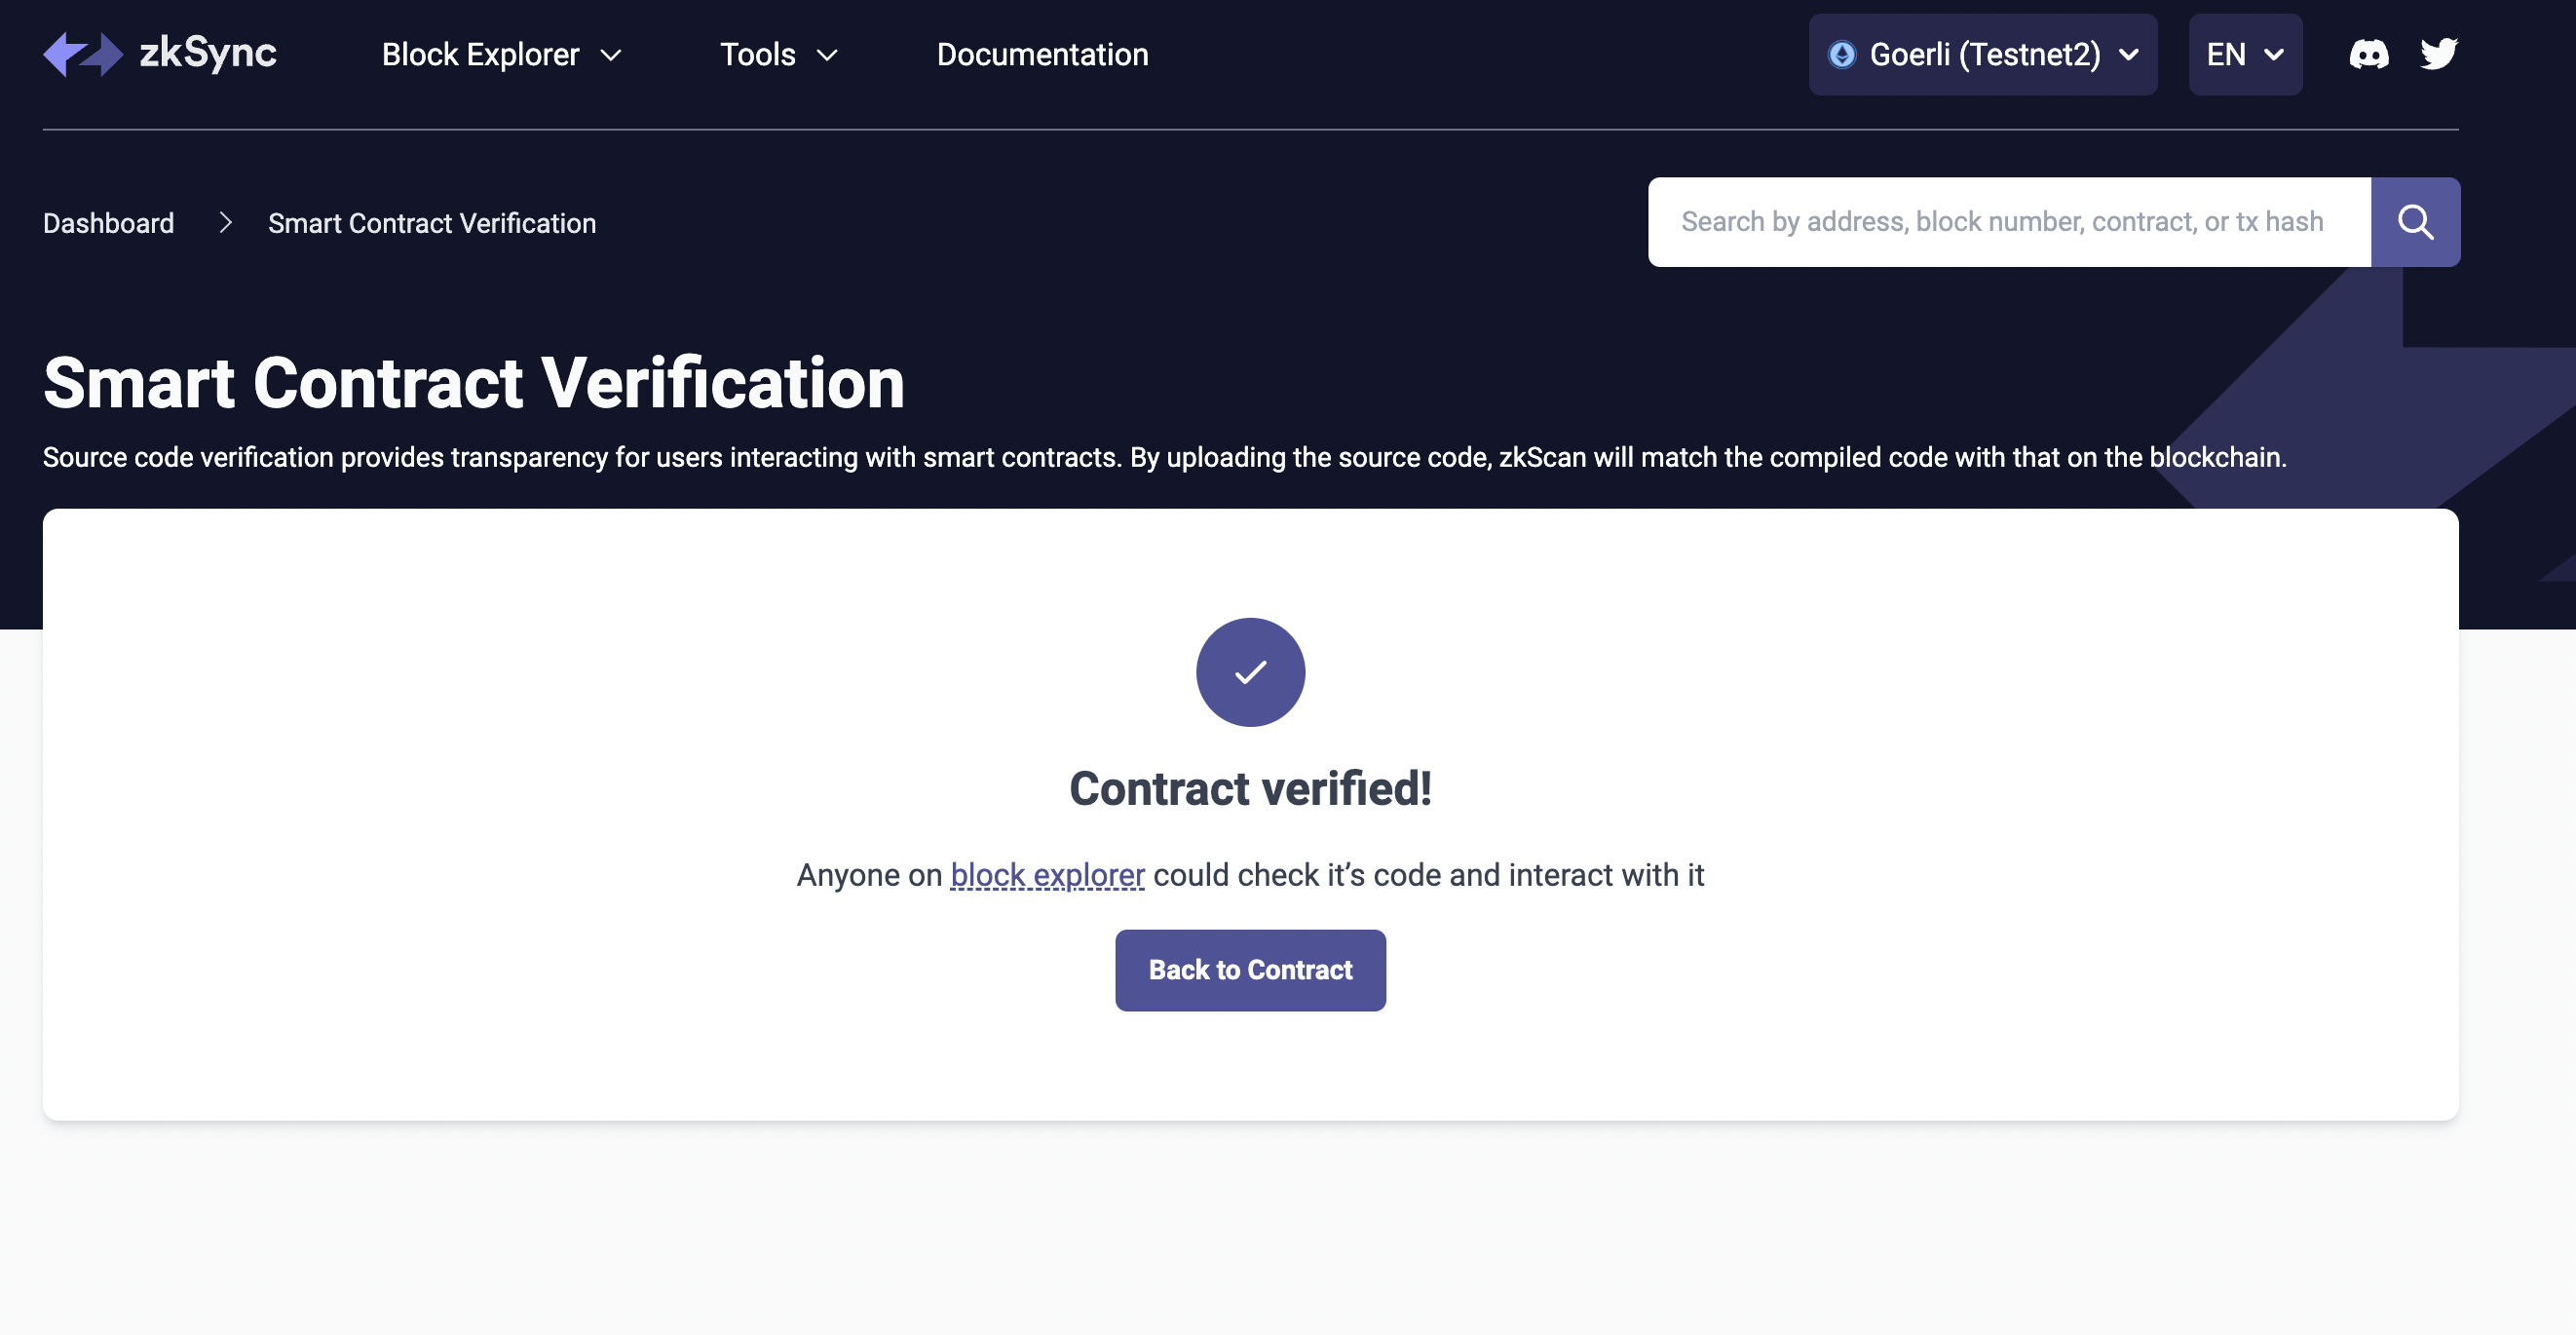 Smart Contract Verified!